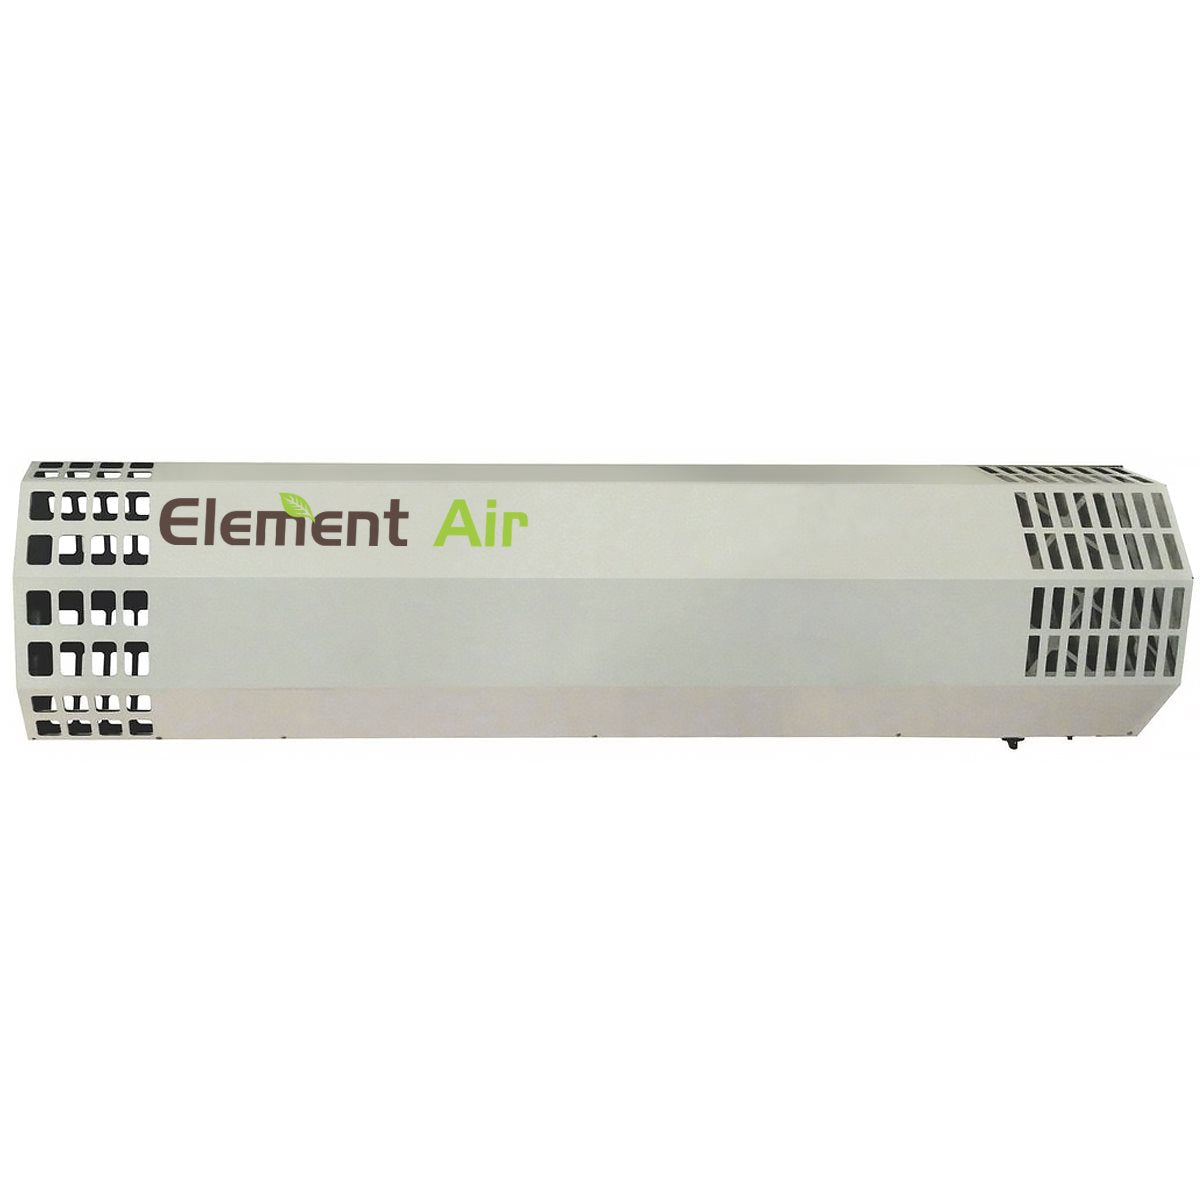 Product Image:Element Air Tower Wall Mount Unit